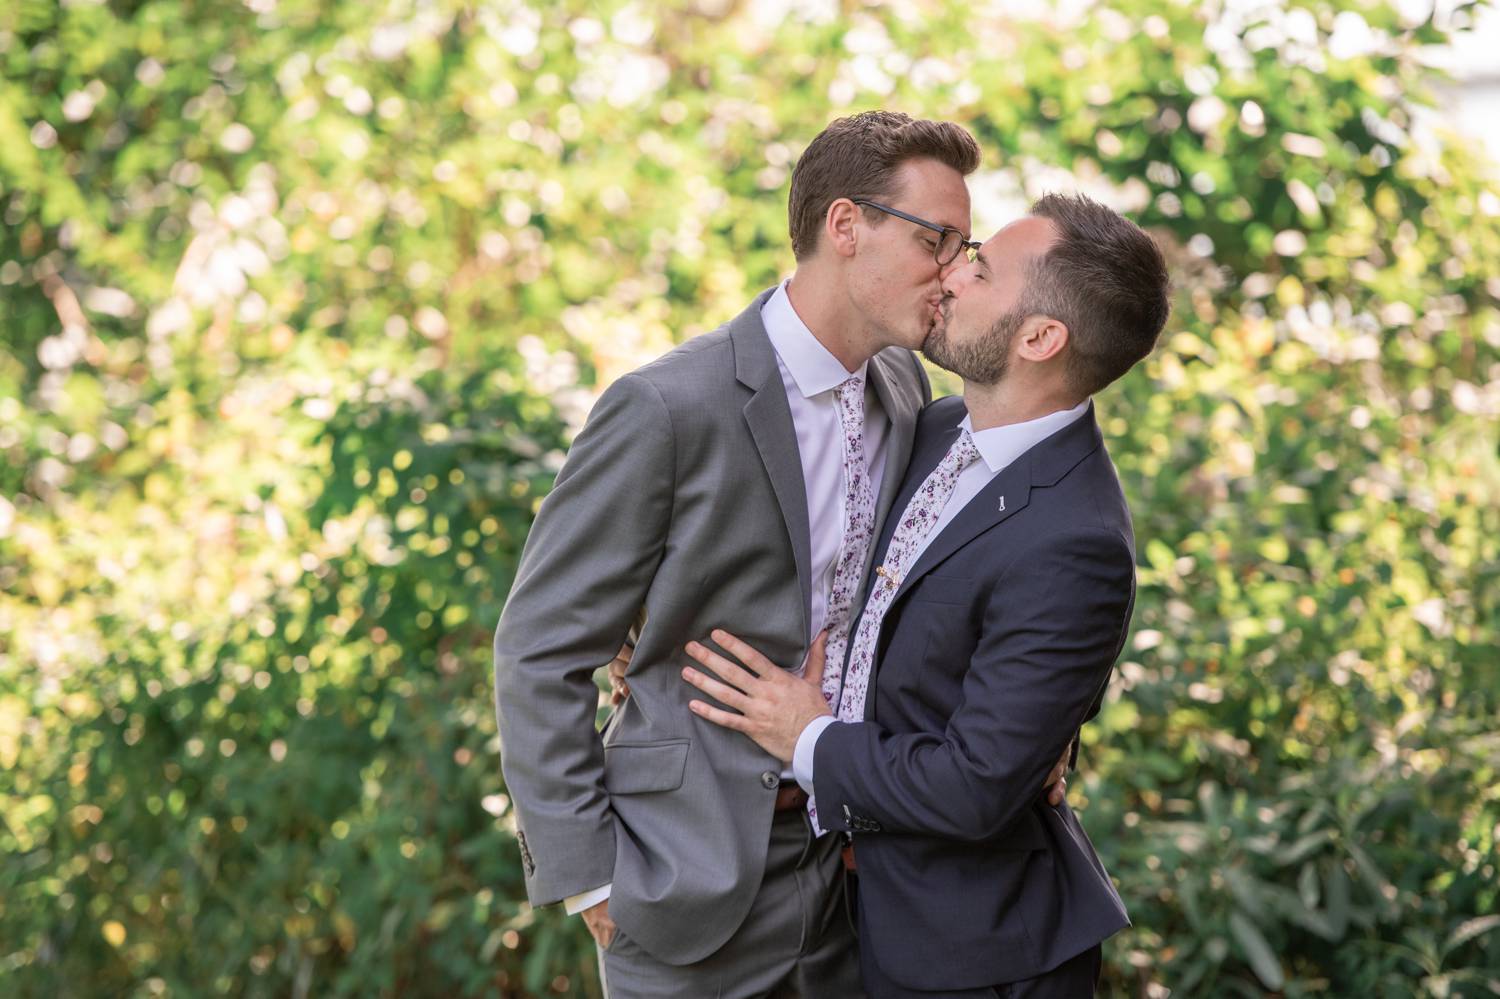 Two grooms kiss outside on their wedding day